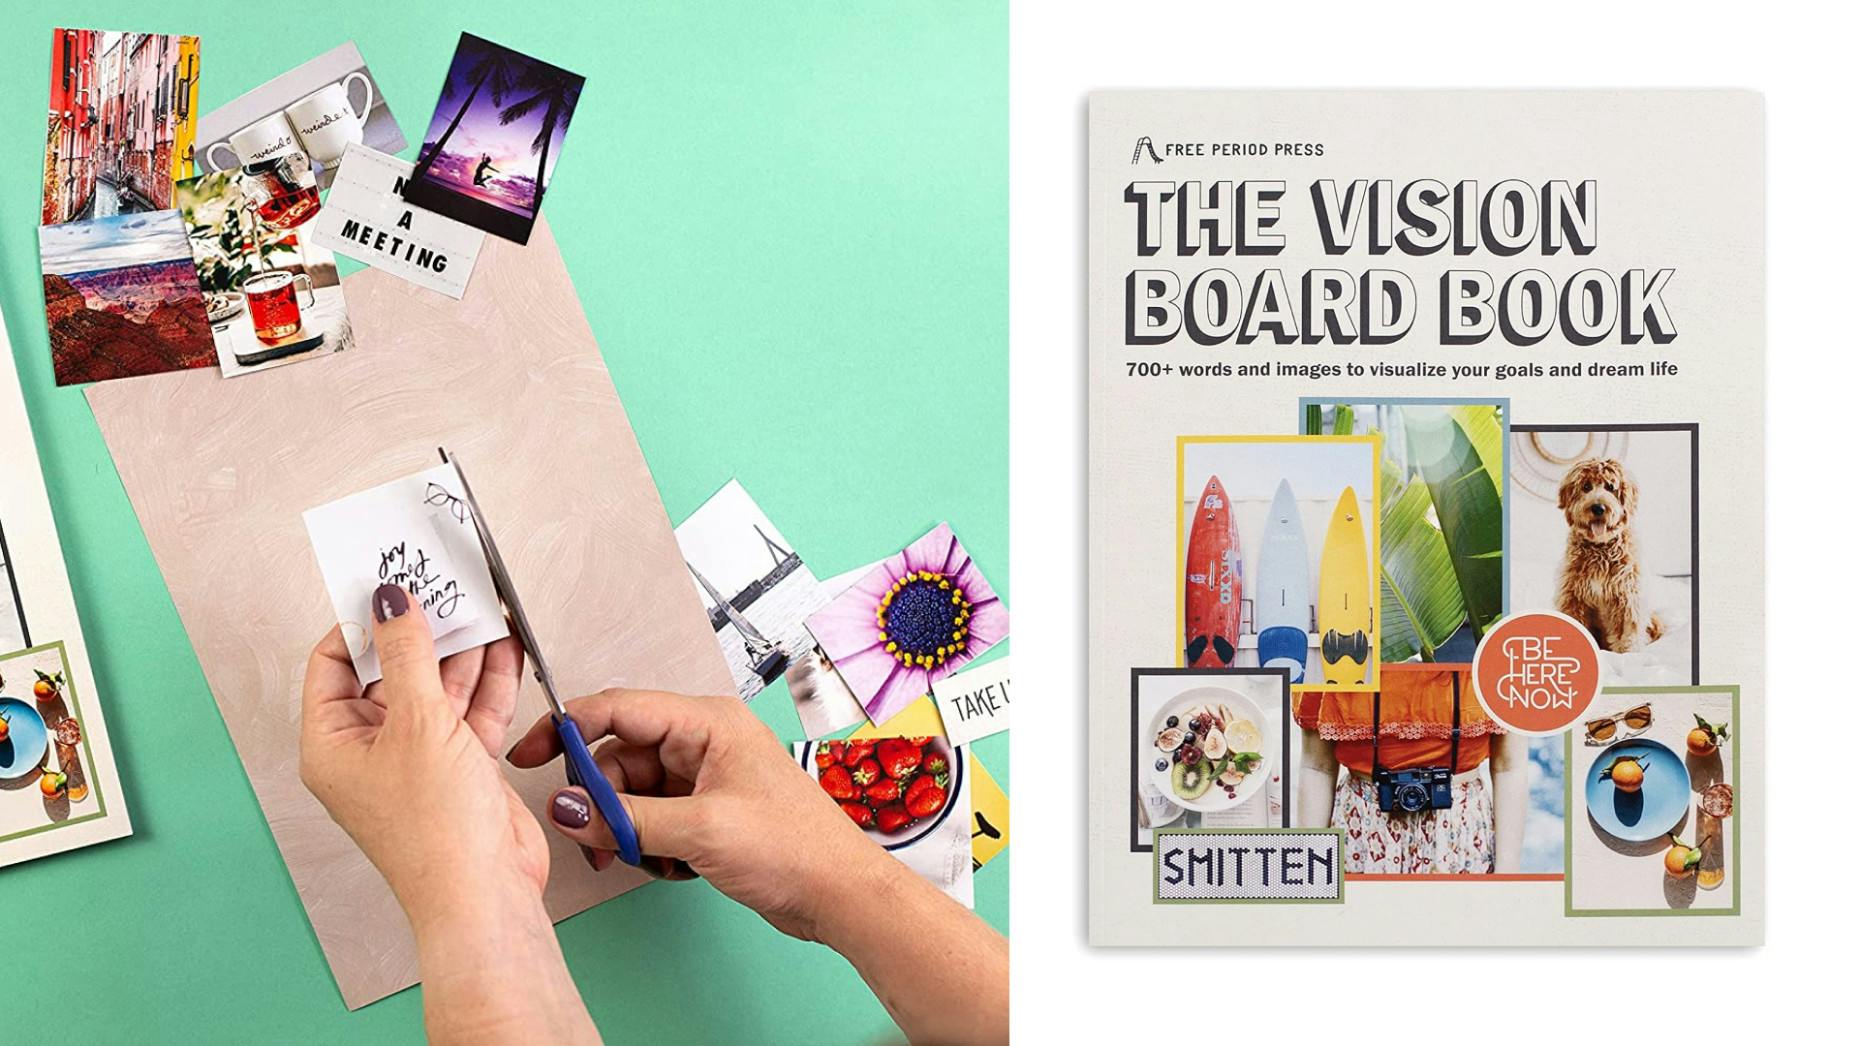 vision board cut-out book for scrapbooking and vision board making